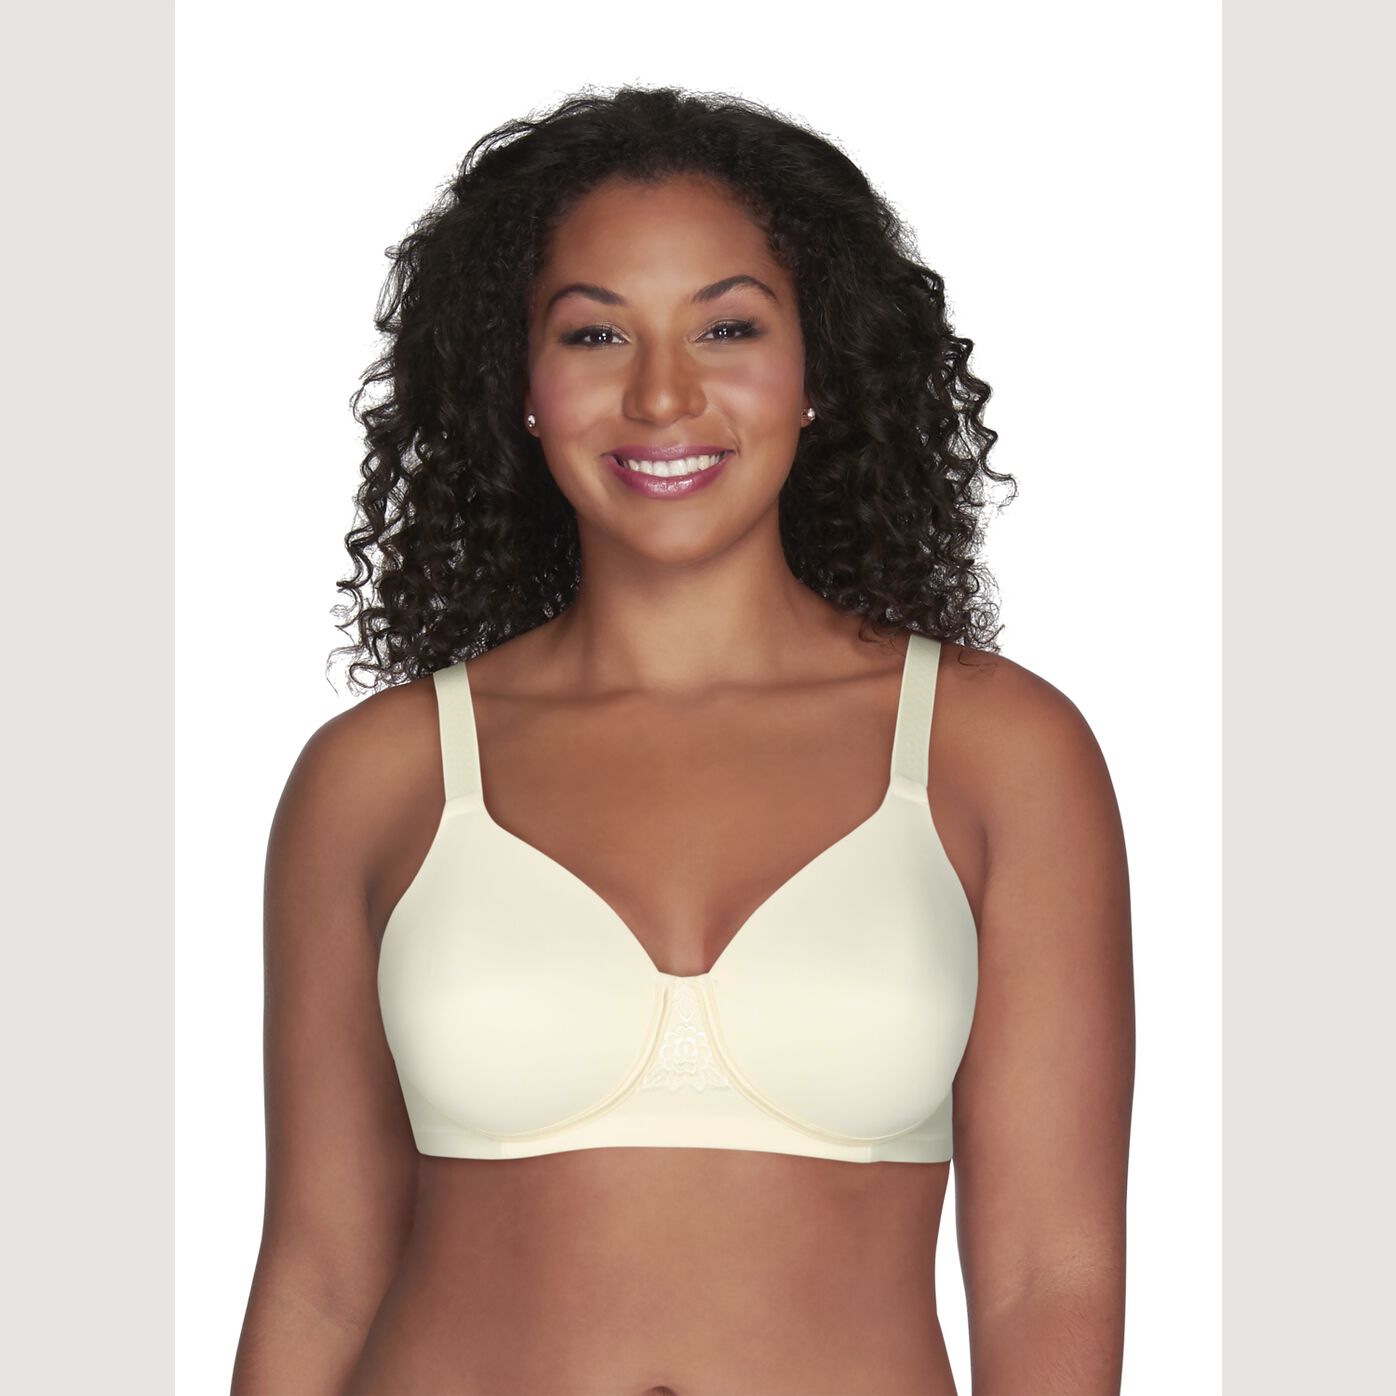 Cropped length Back Smoothing Bras with Underwire and No-slip